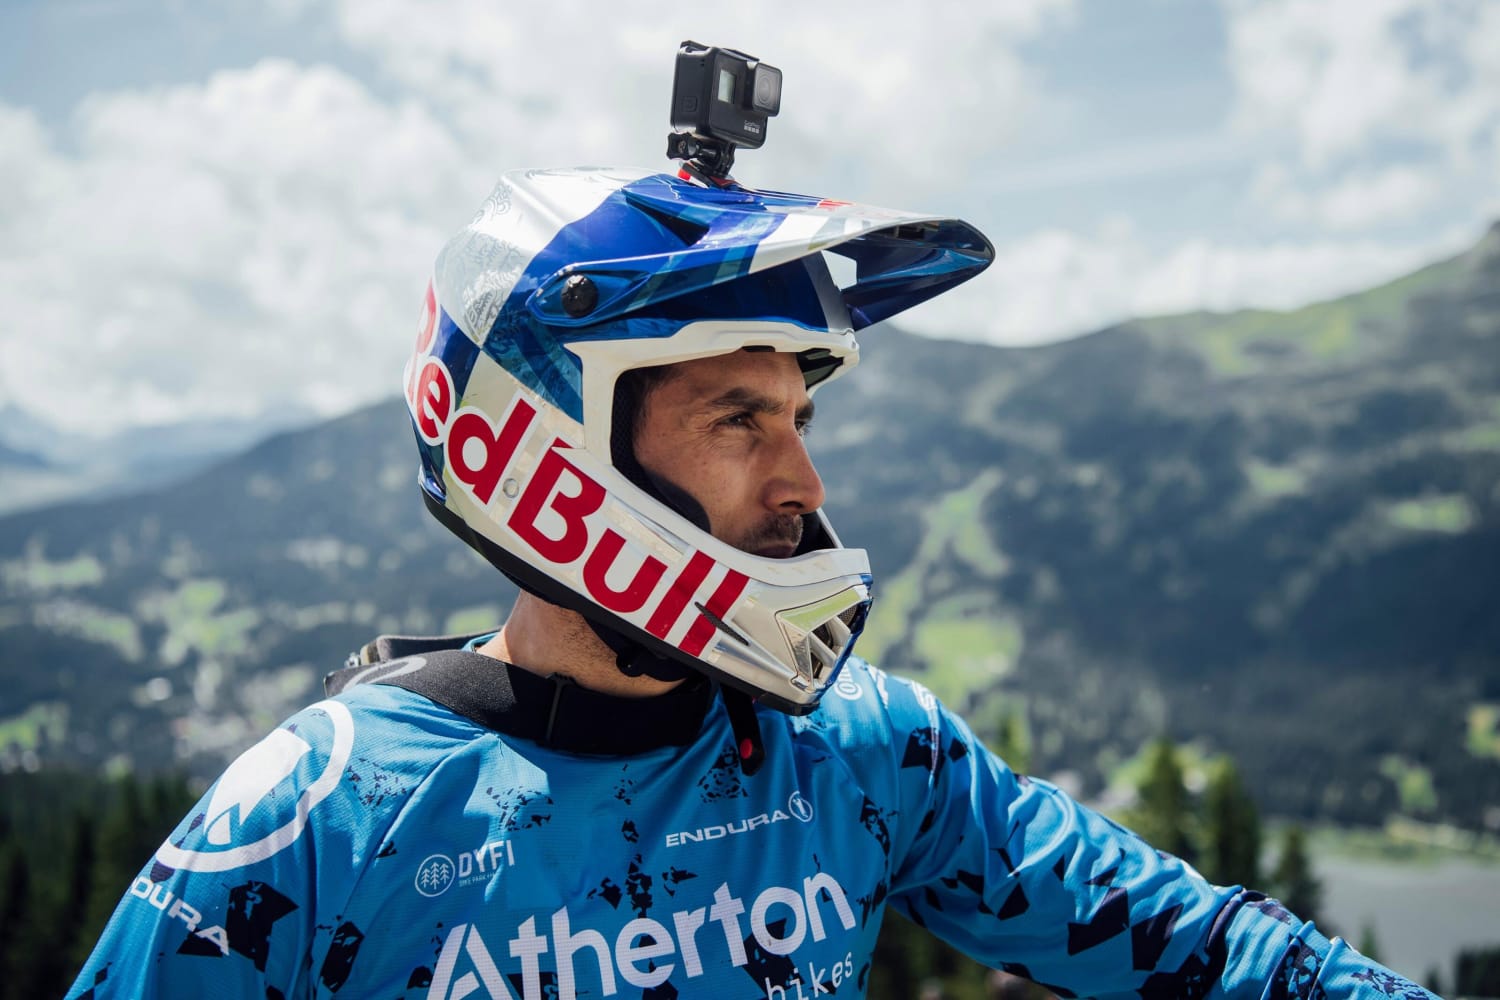 Action cameras: The 9 best for mountain biking filming